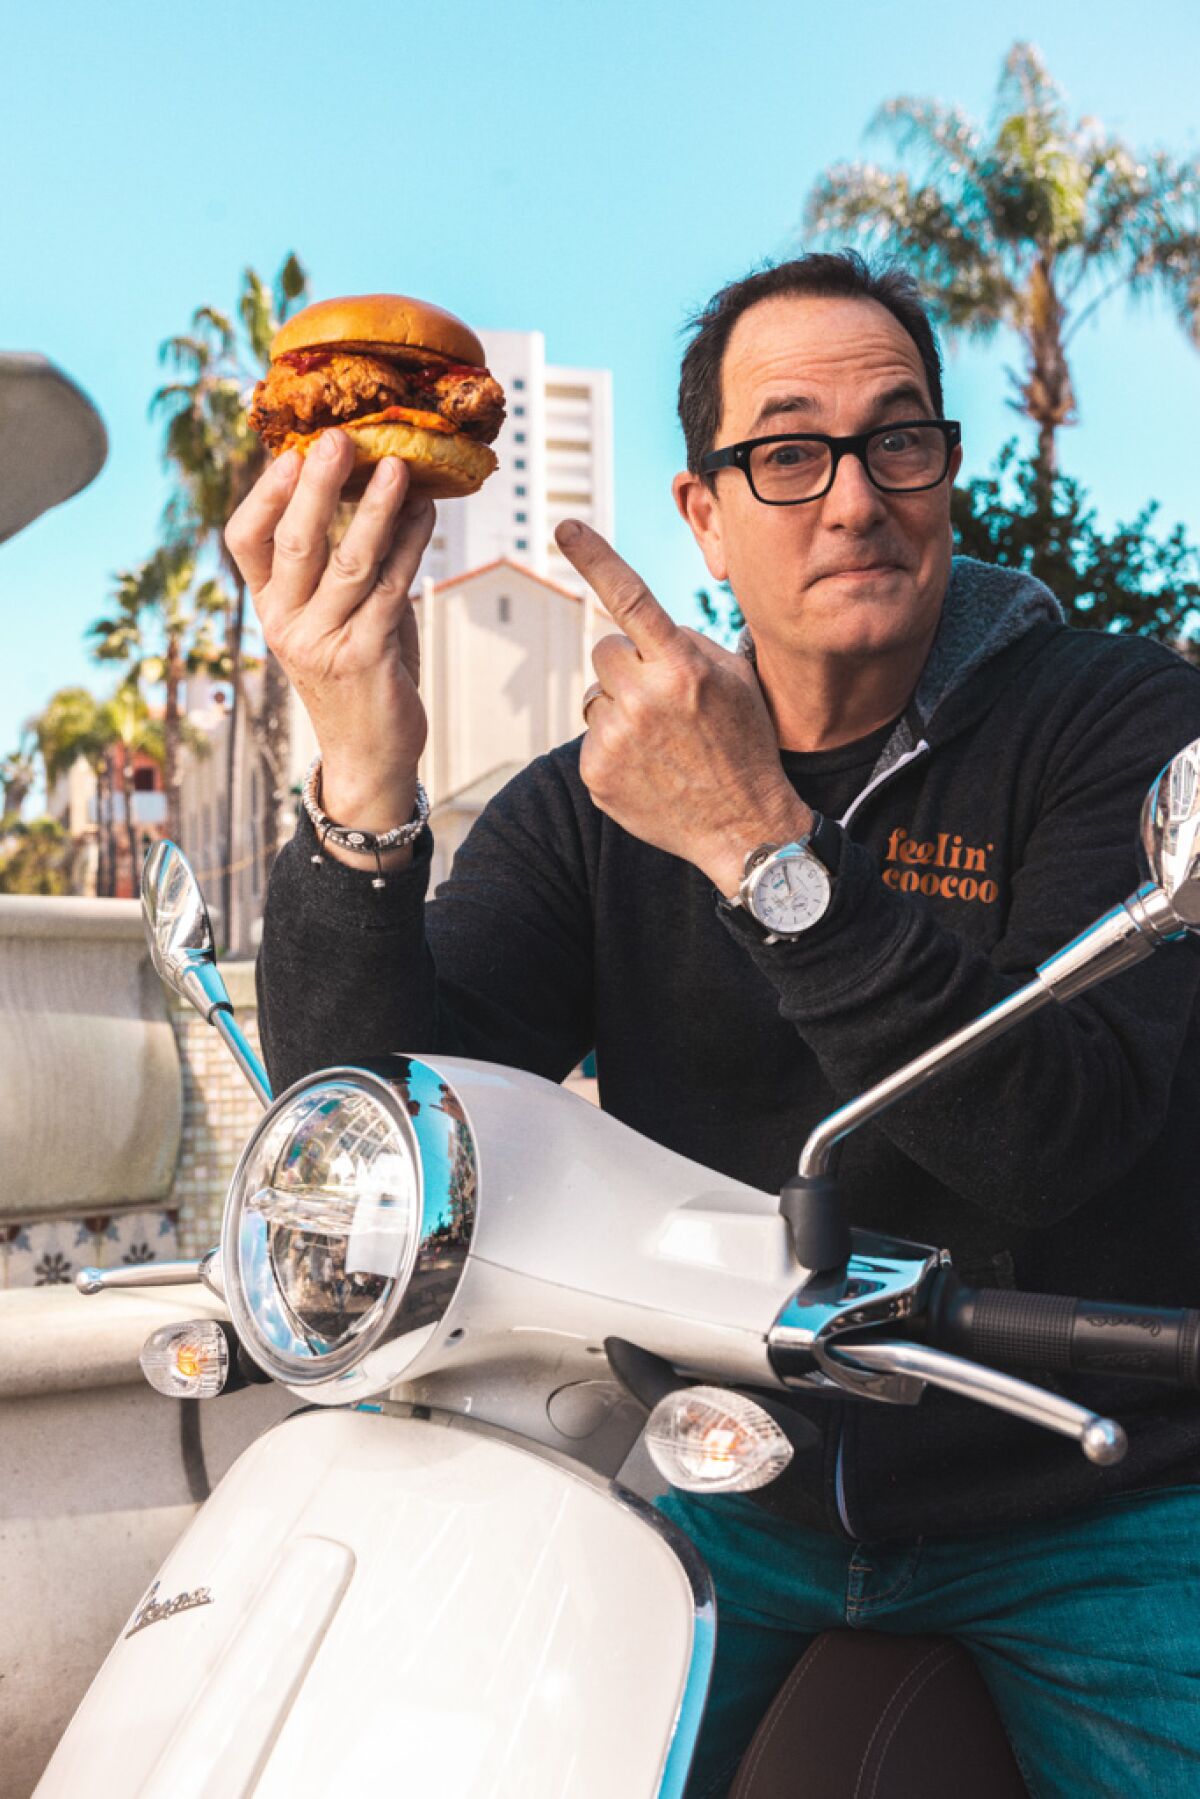 Sam "The Cooking Guy" Zien on a Vespa holding a fried chicken sandwich